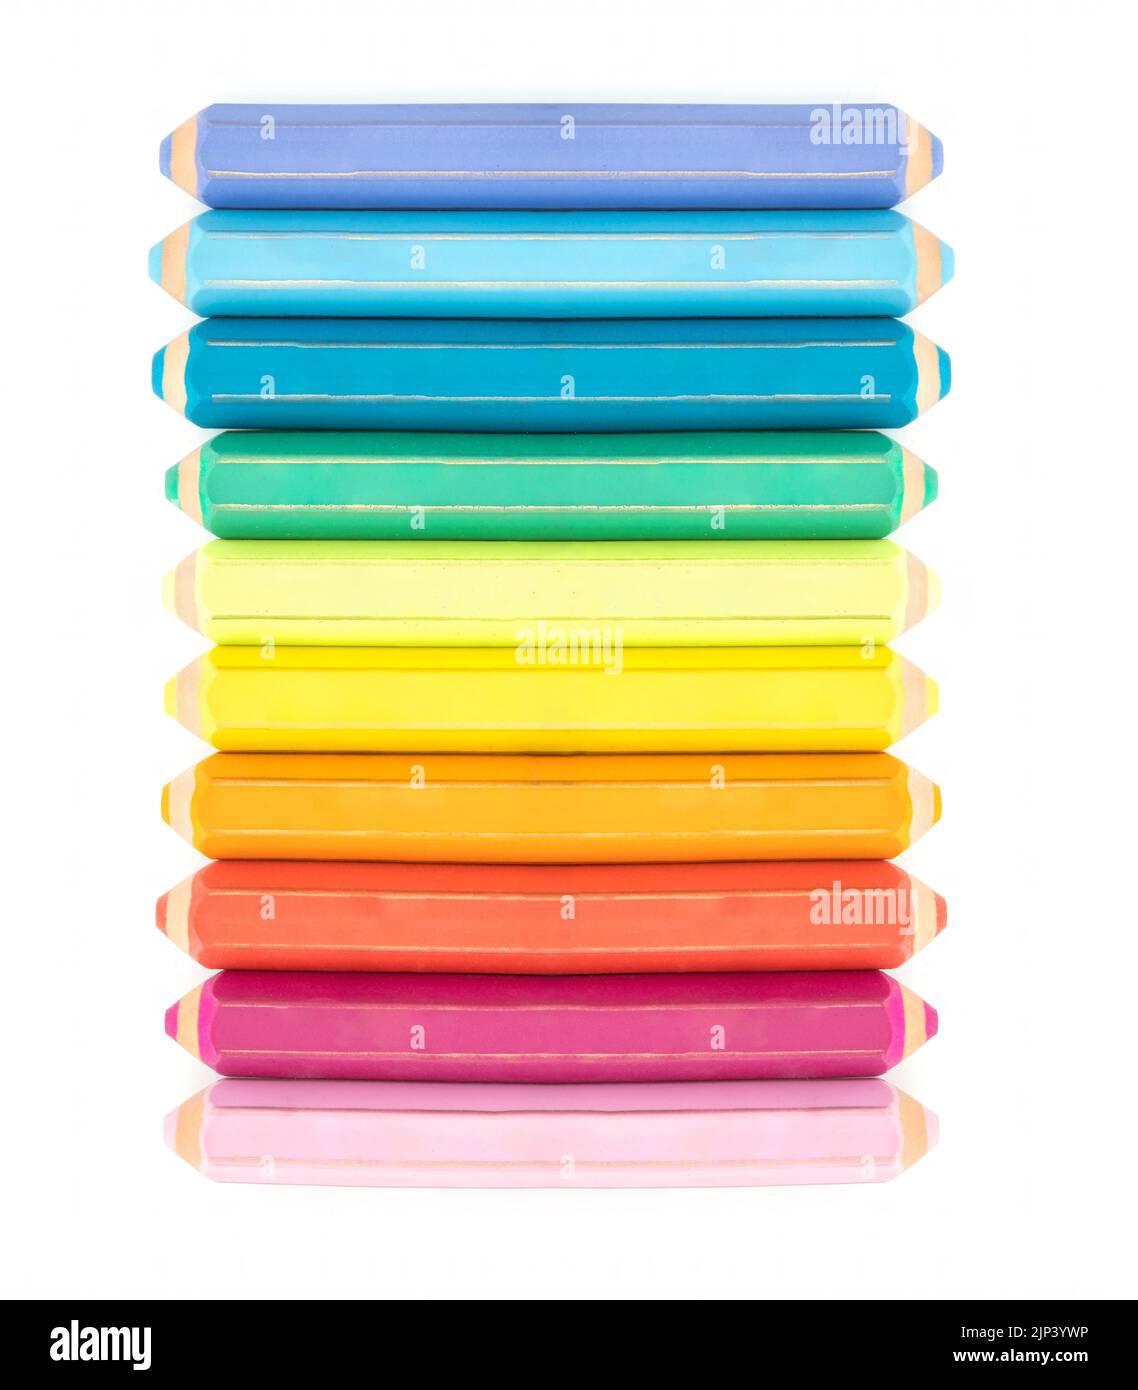 https://c8.alamy.com/comp/2JP3YWP/colorful-eraser-in-shaped-pencil-on-white-background-2JP3YWP.jpg